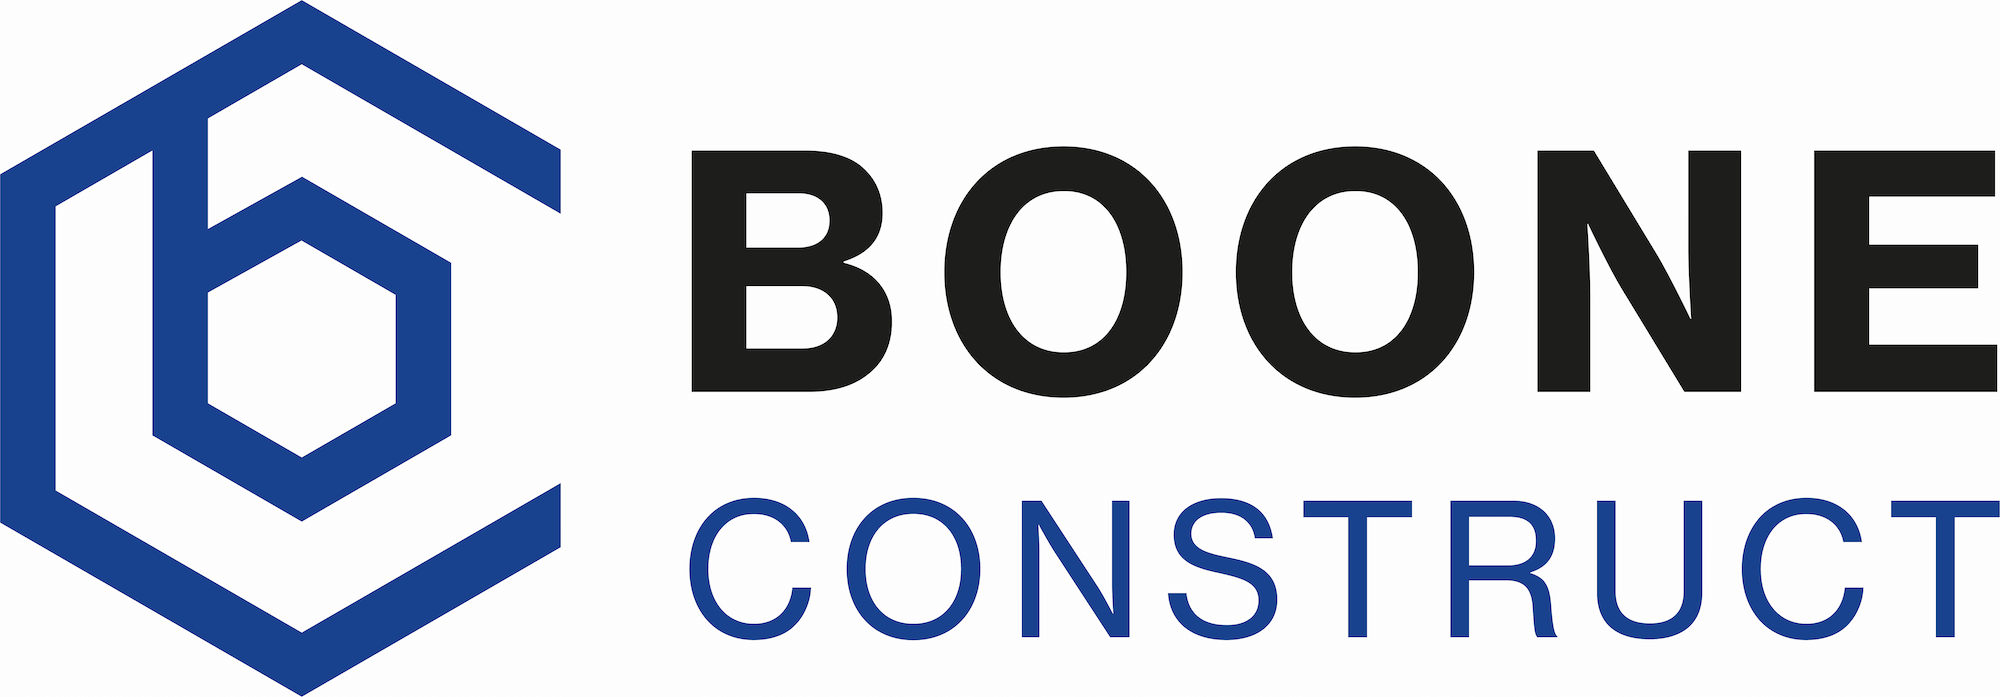 Boone Construct